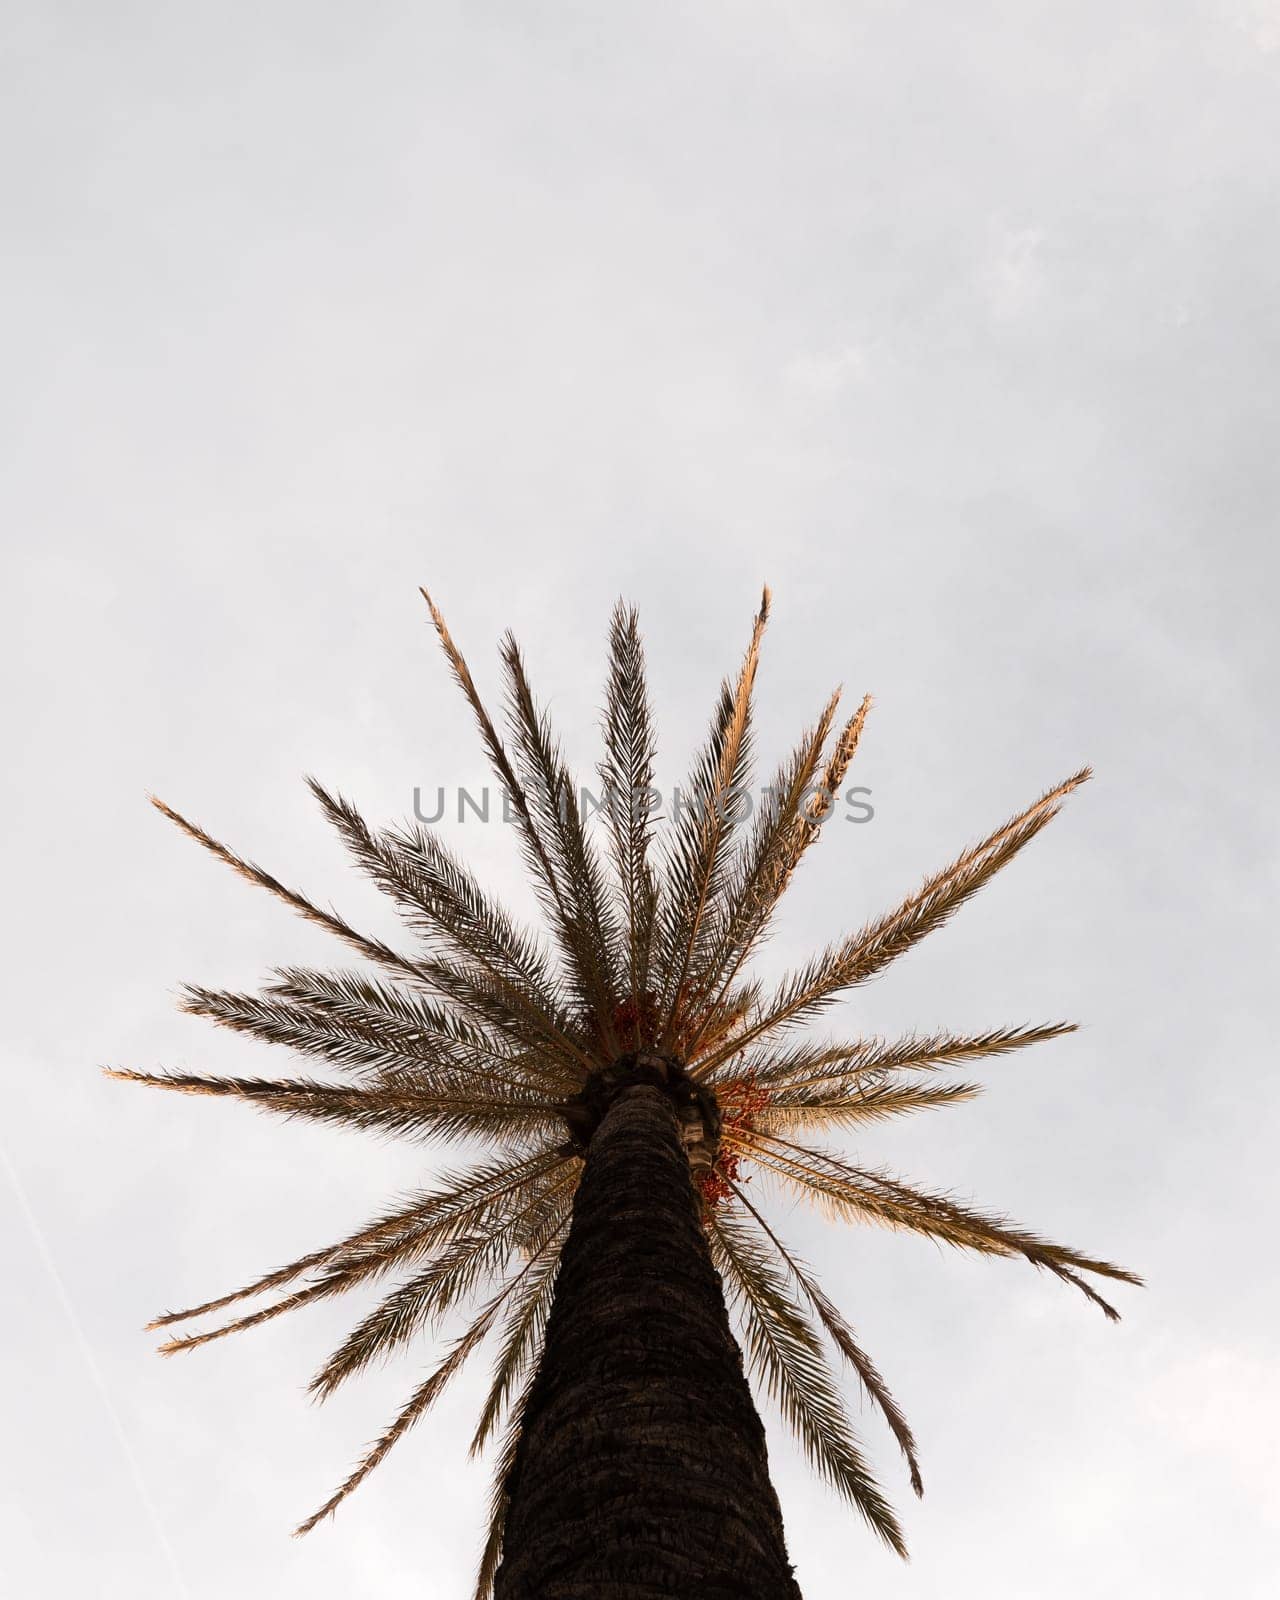 Upward View of a Tall Palm Tree Against a Cloudy Sky by apavlin